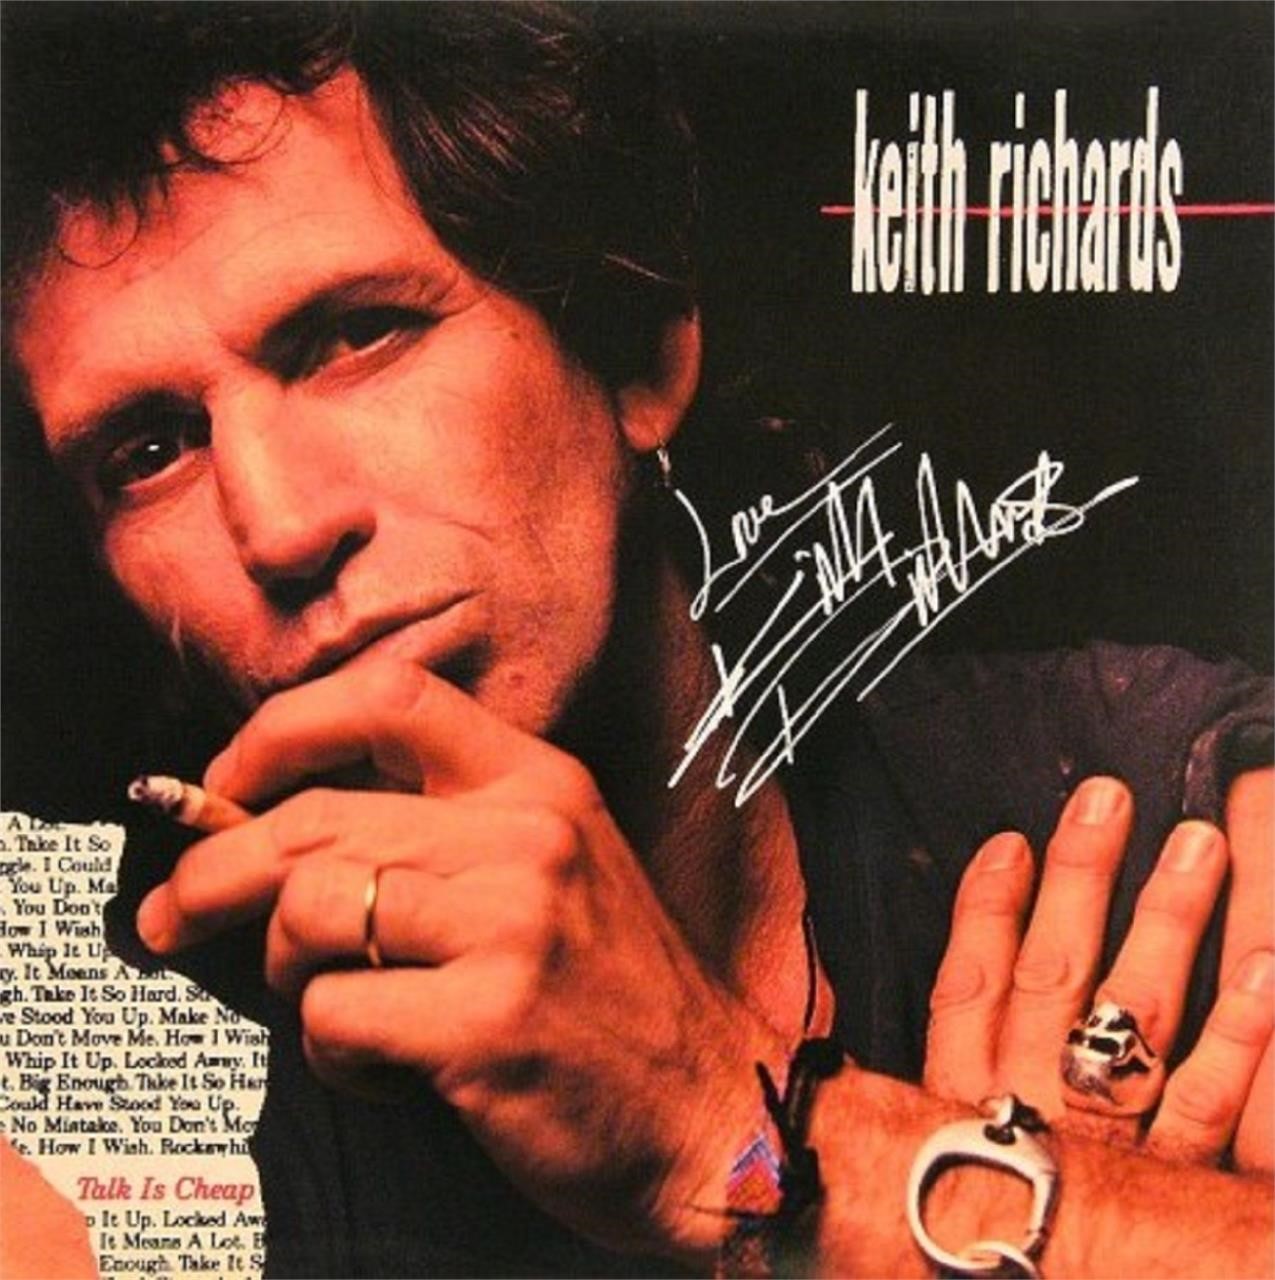 Keith Richards signed Talk is Cheap album